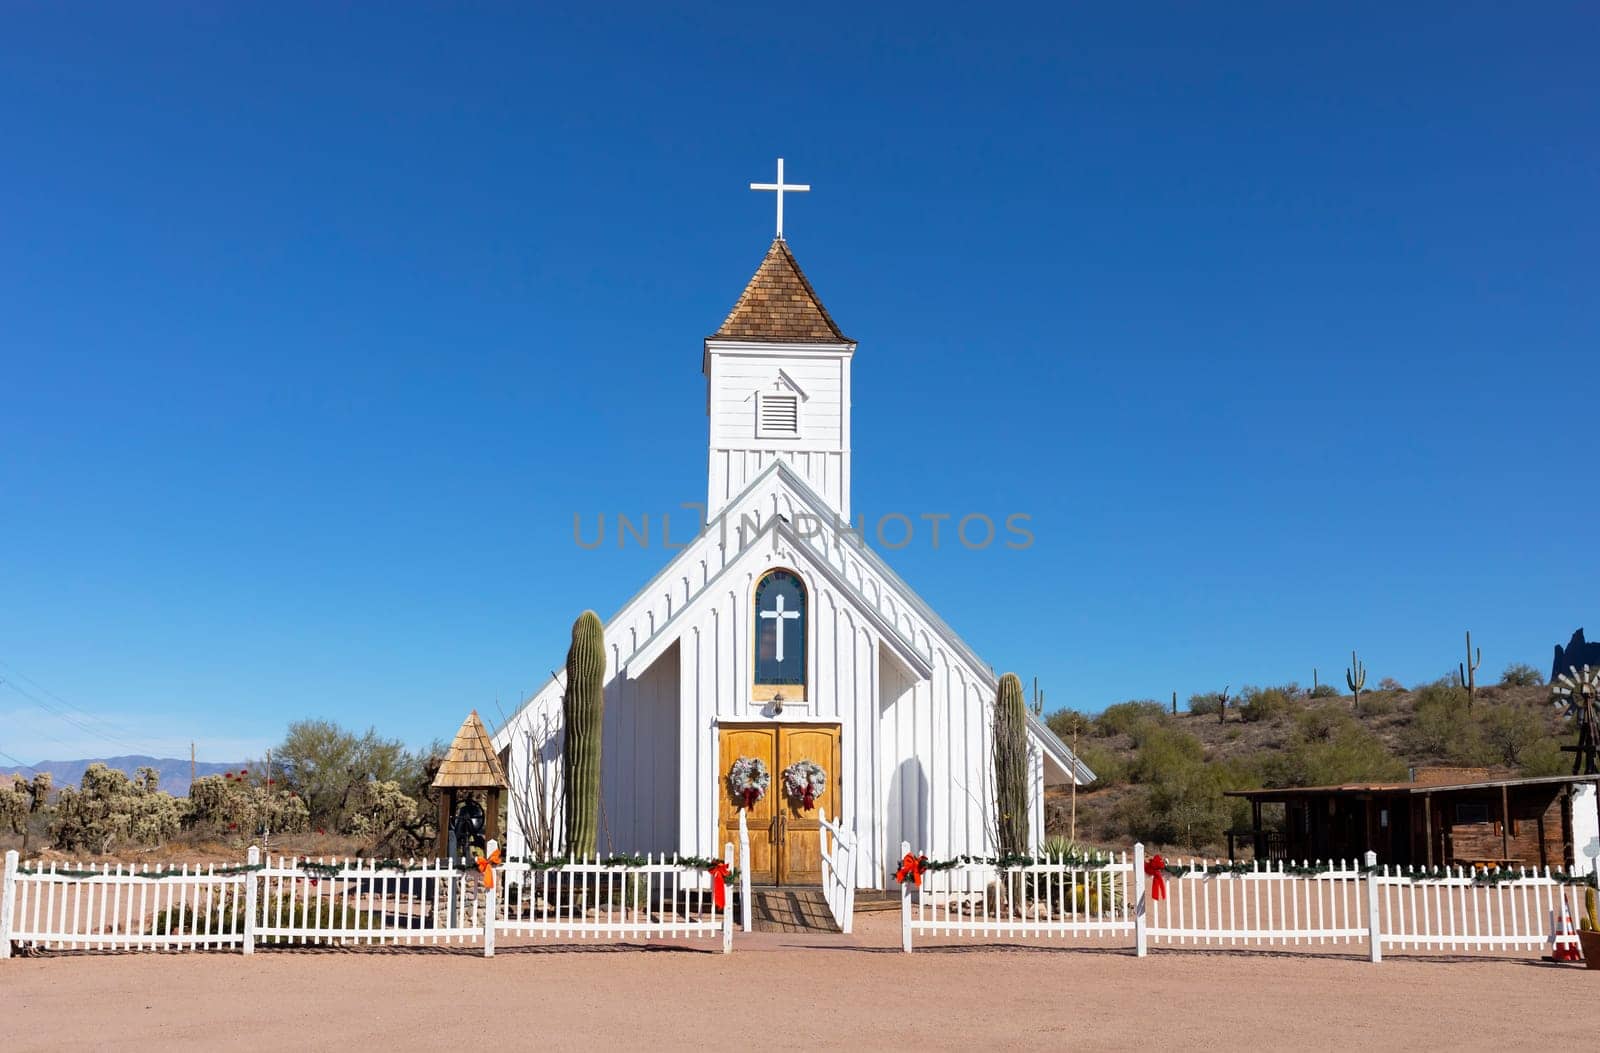 Old Elvis Chapel, Church From Arizona's Mining Days in Superstition Mountains, Near Phoenix, Apache Junction, Ghost Town of Goldfield. Blue Sky, Cactus. Horizontal Plane by netatsi